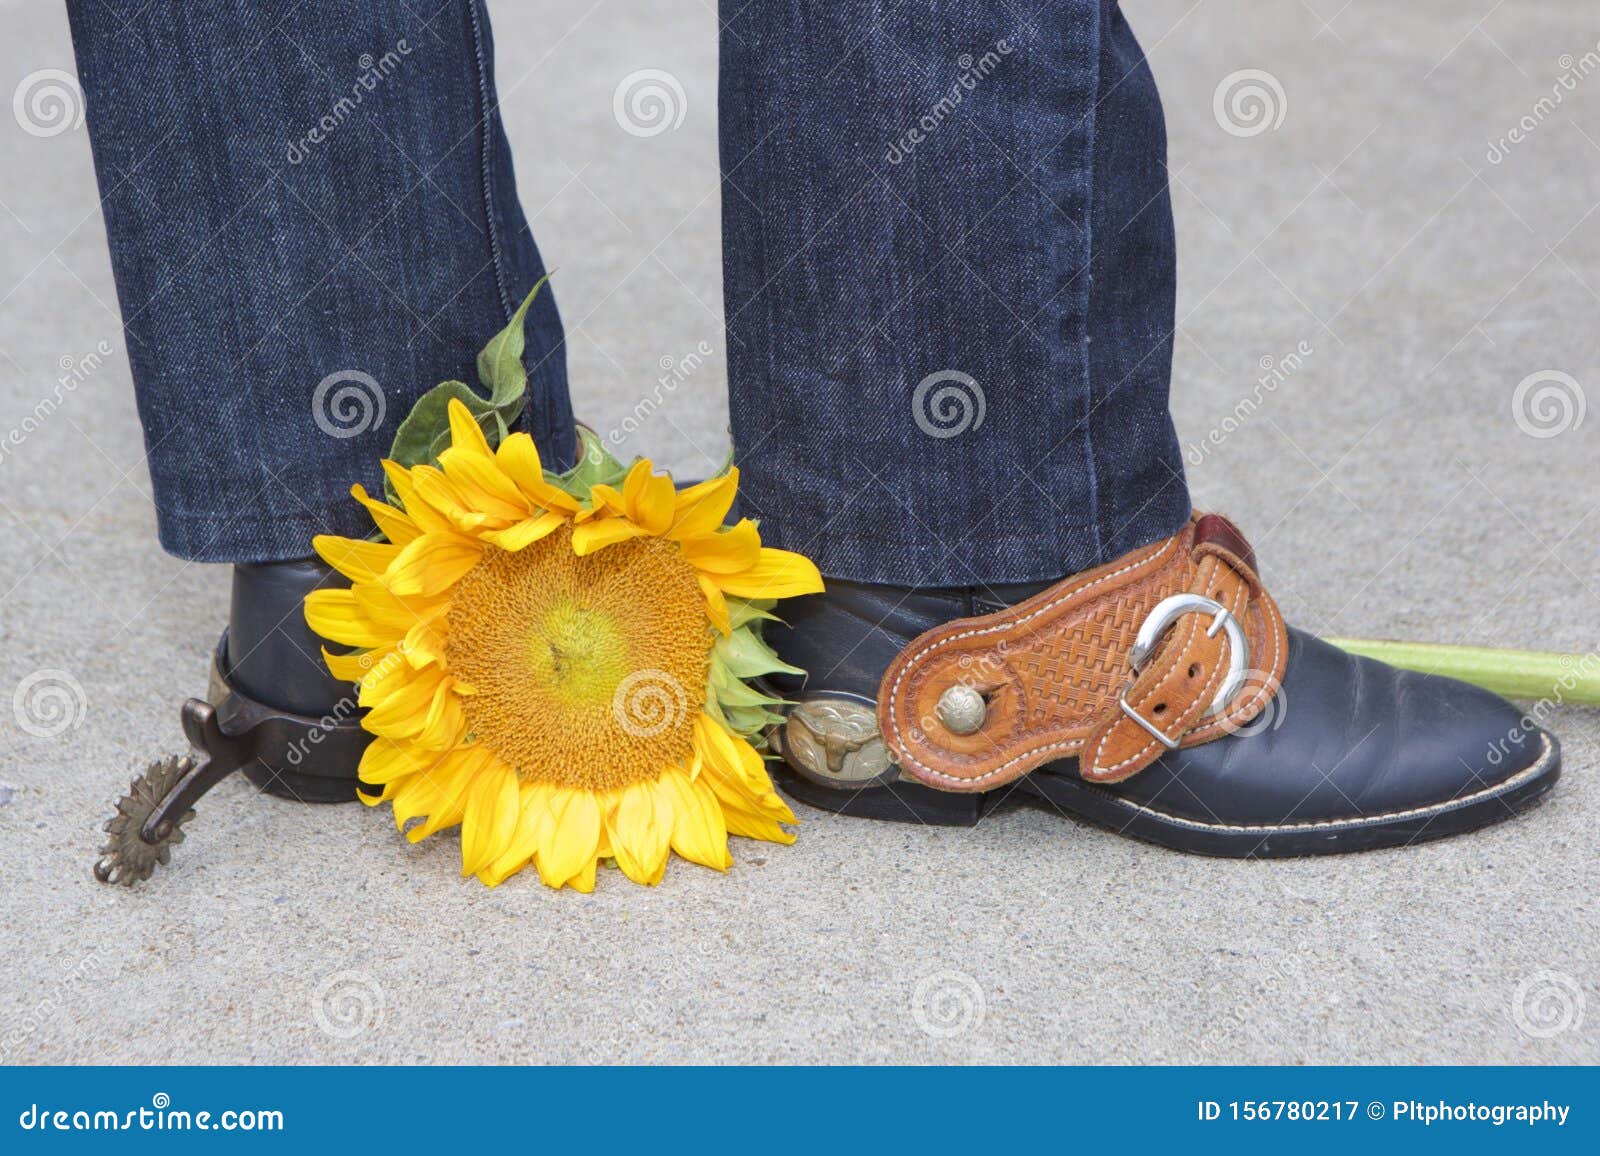 boots, spurs and sunflower